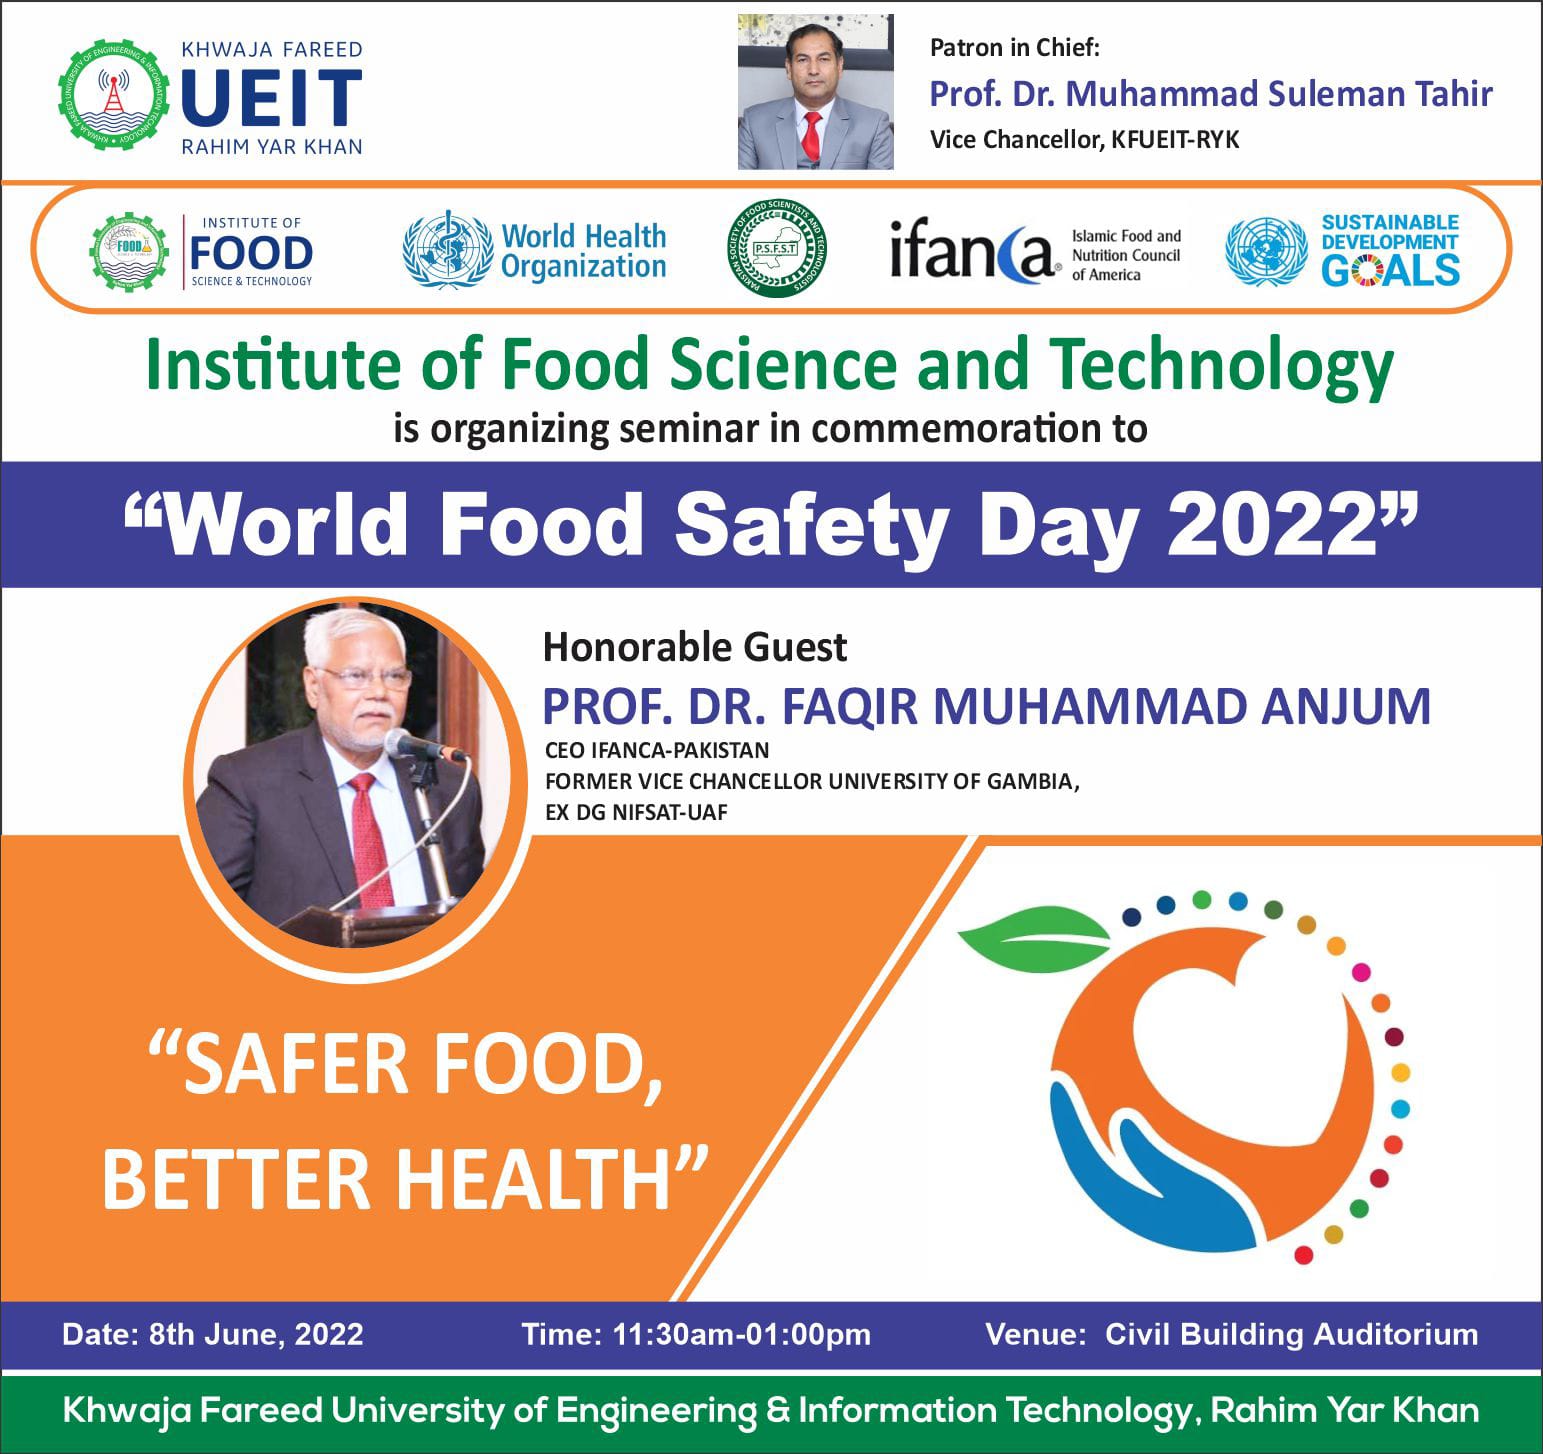 World Food Safety Day, 2022